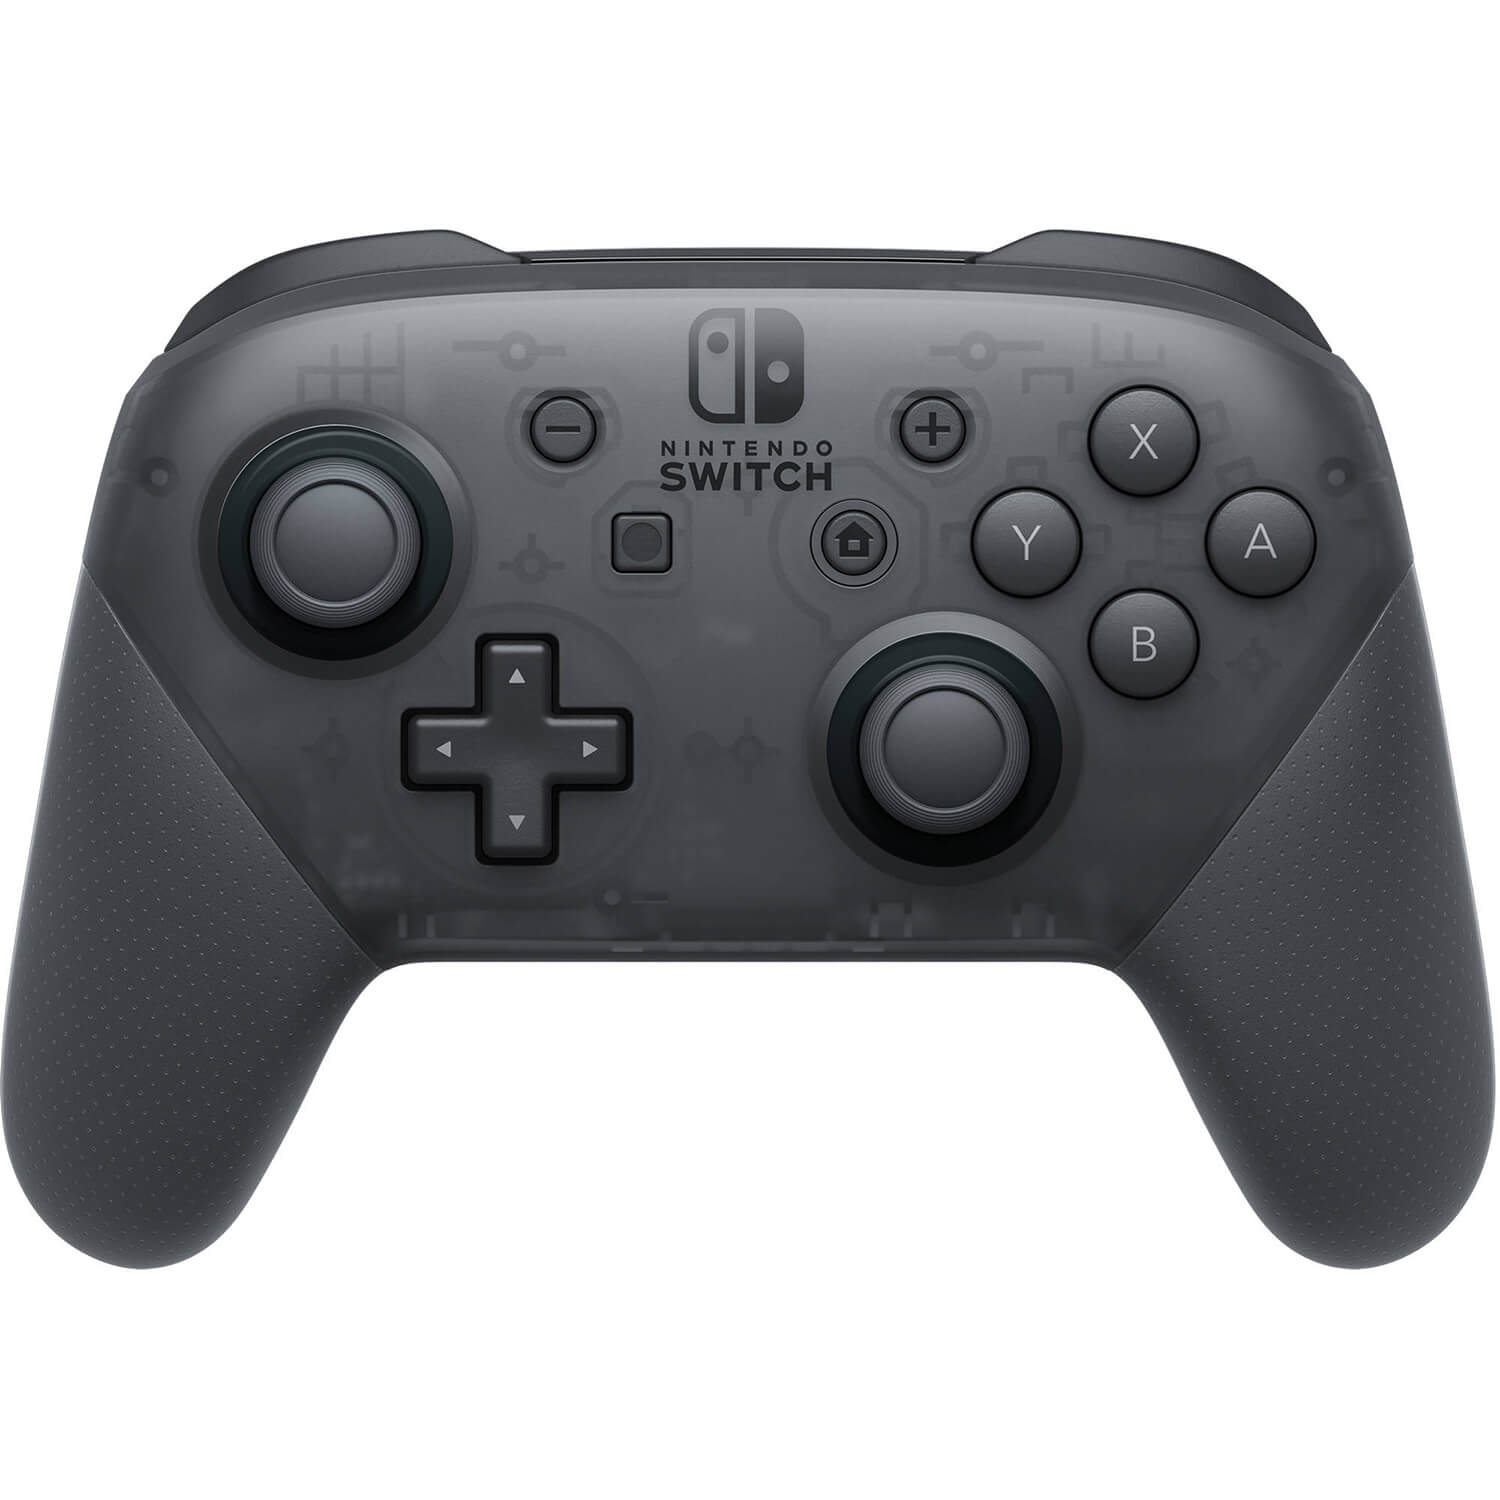 Super Mario 3D World + Bowser’s Fury and Wireless Pro Controller Bundle - Nintendo Switch - Pro-Distributing